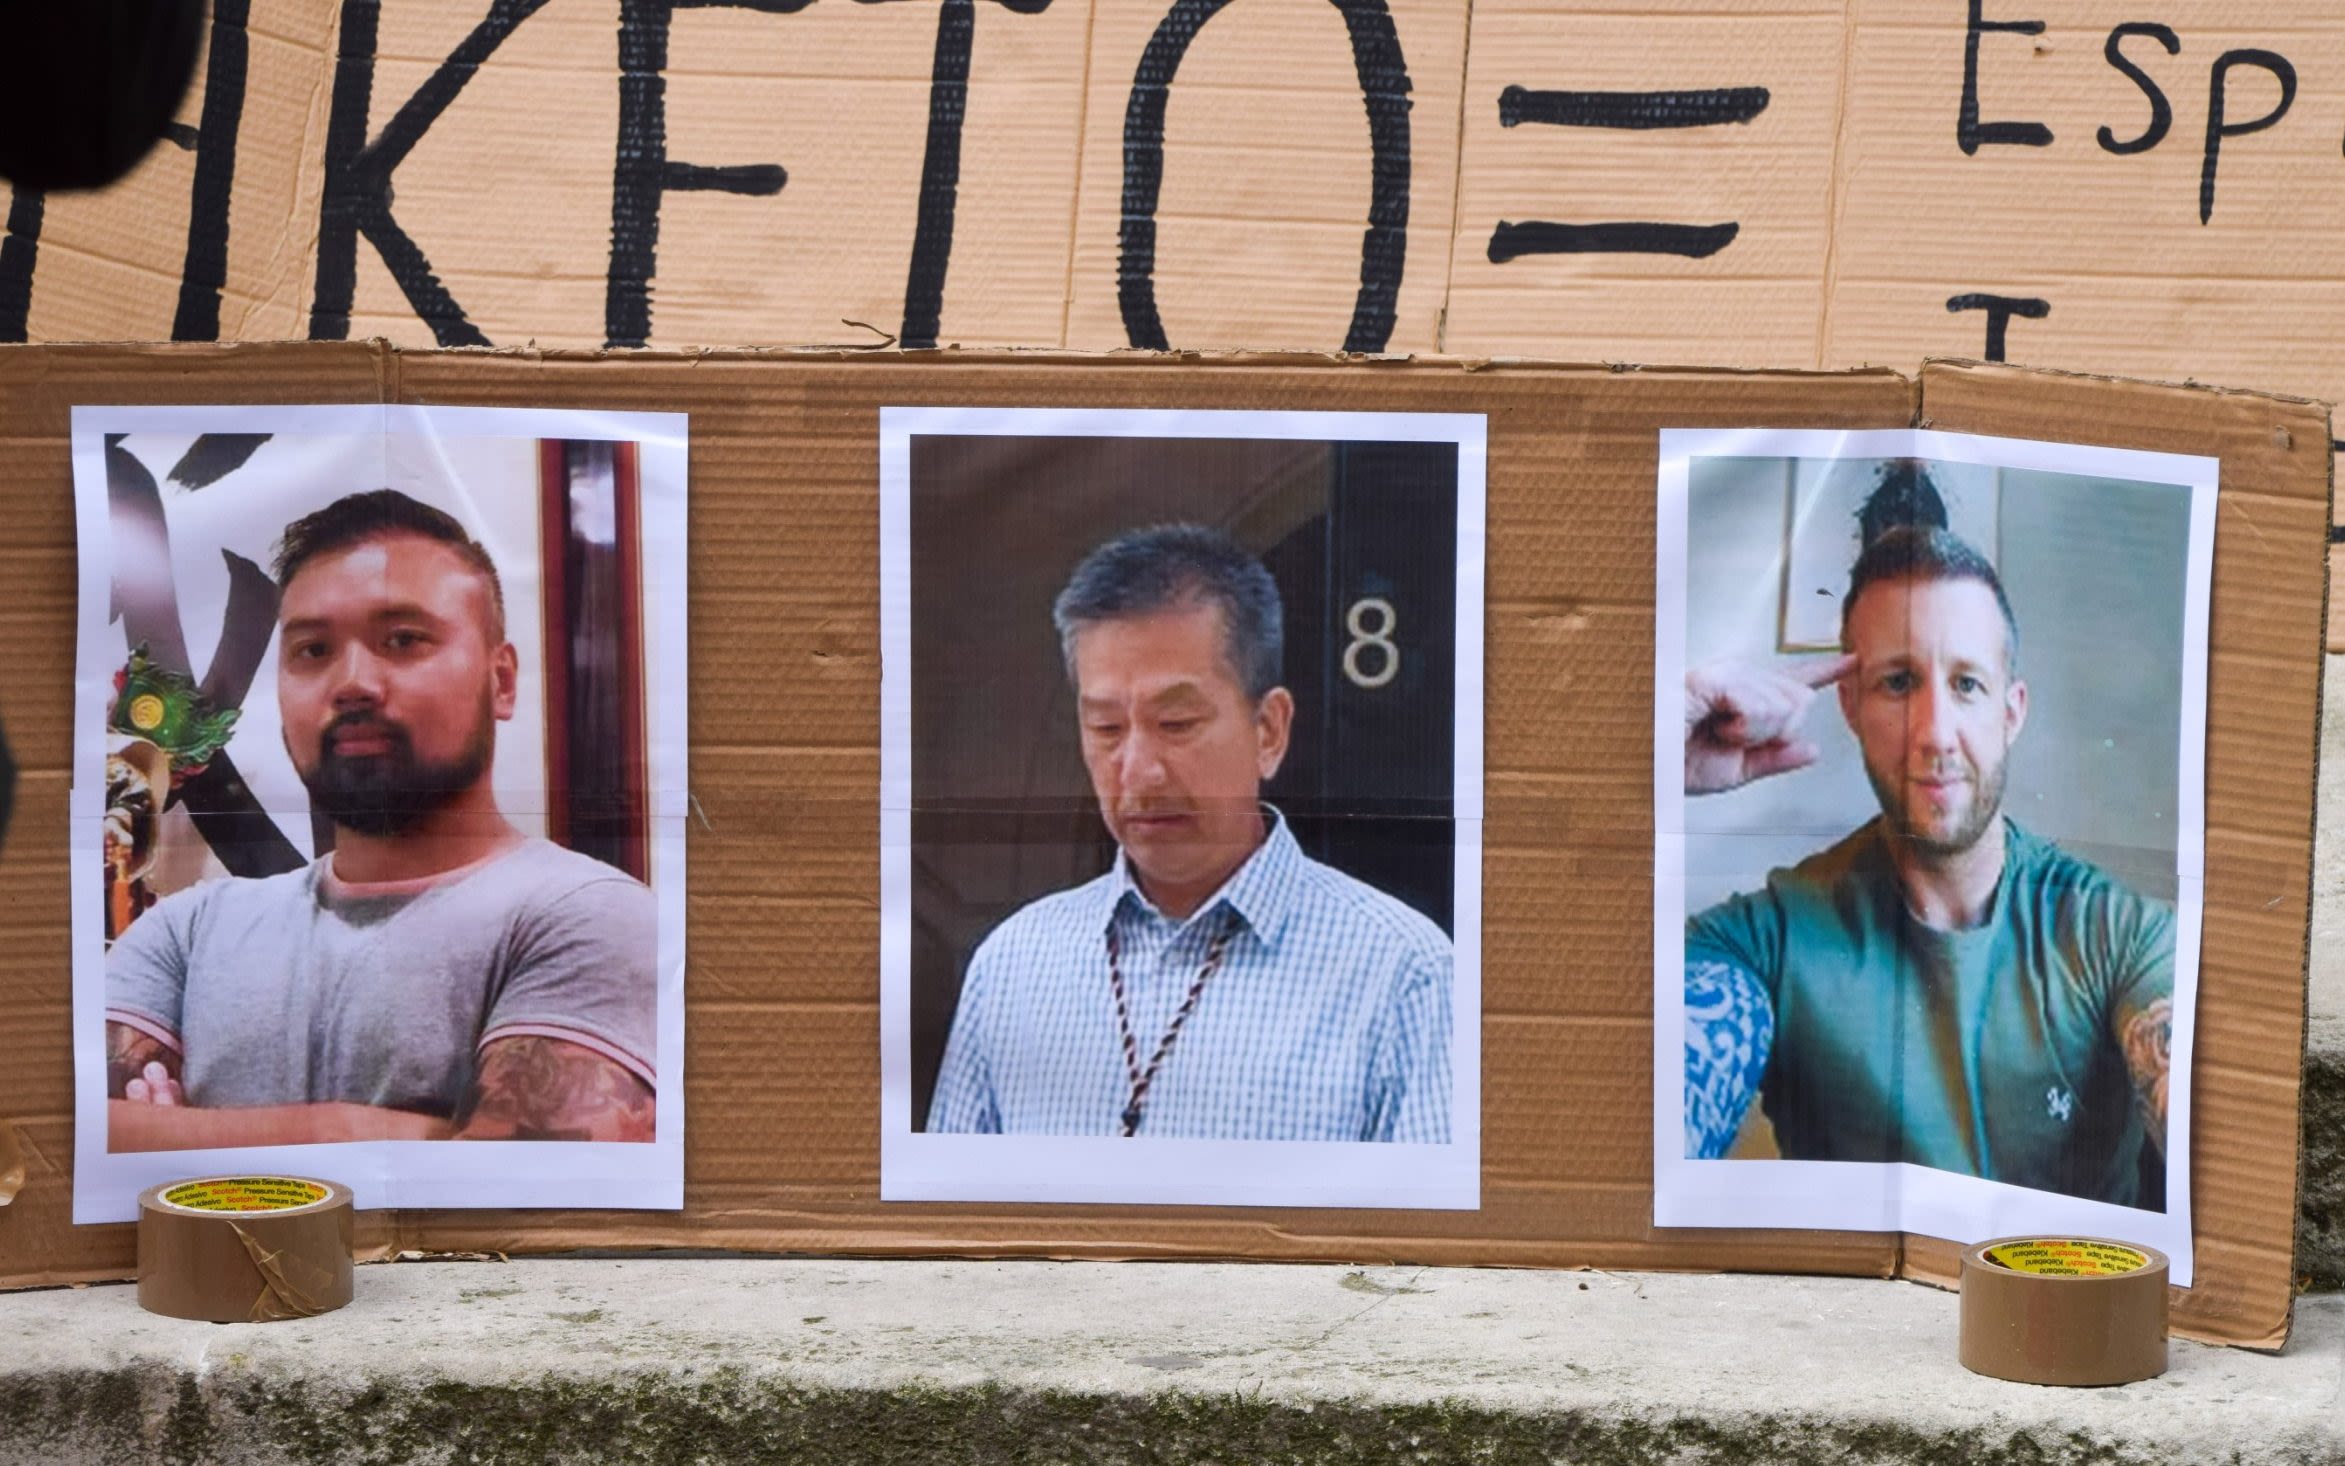 Hong Kong dissidents in UK ‘fear for their safety’